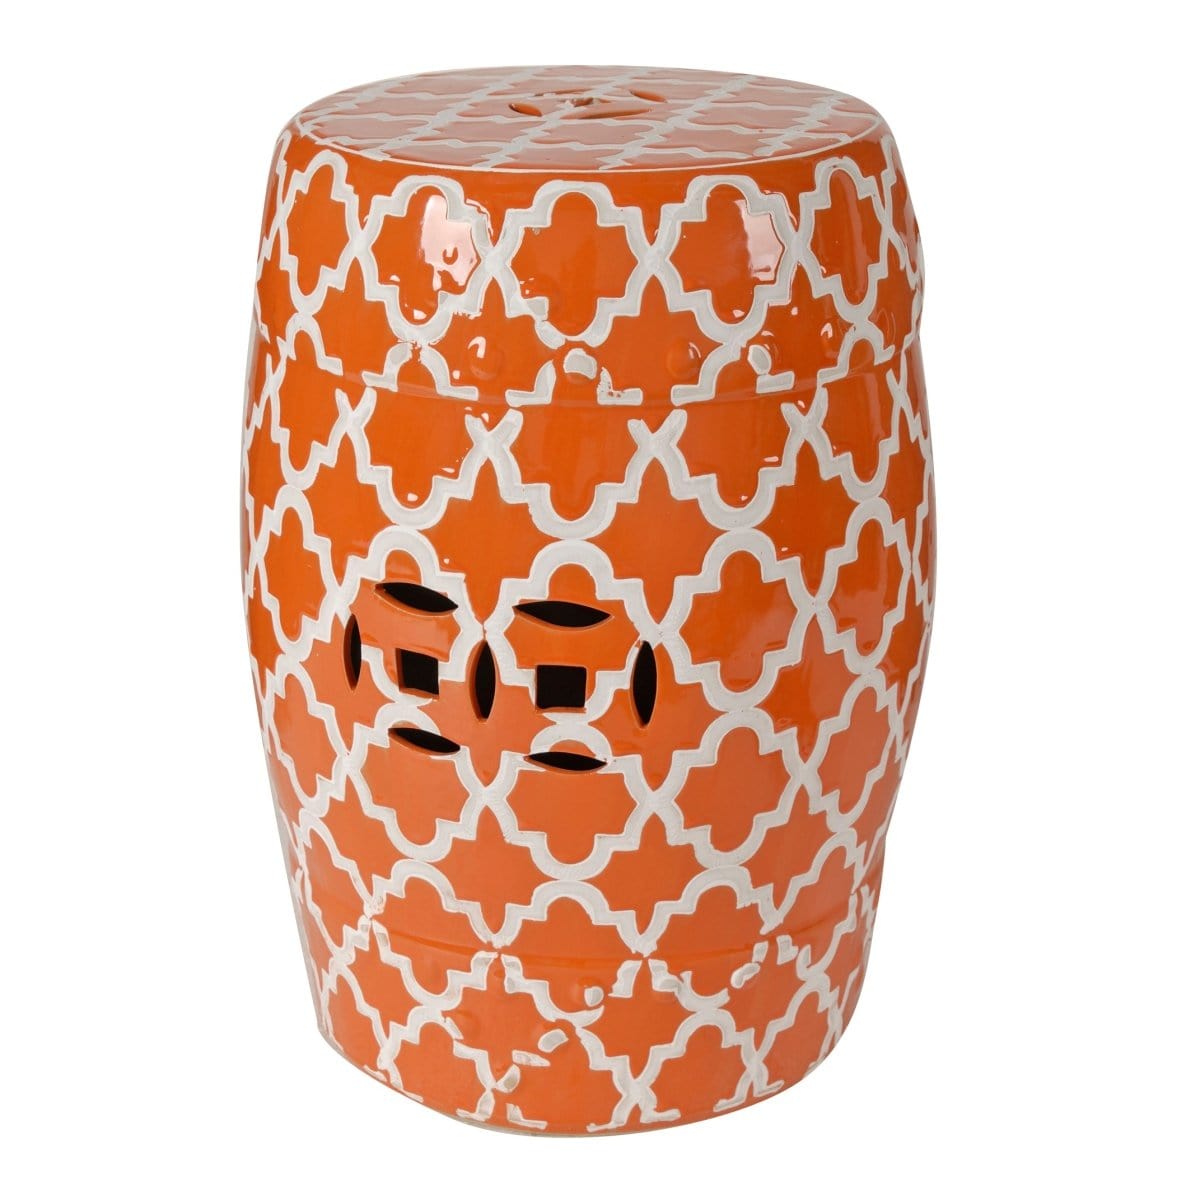 #1 Finley Indoor/Outdoor Patterned Ceramic Stool, Orange/White AB-69634 picket and rail